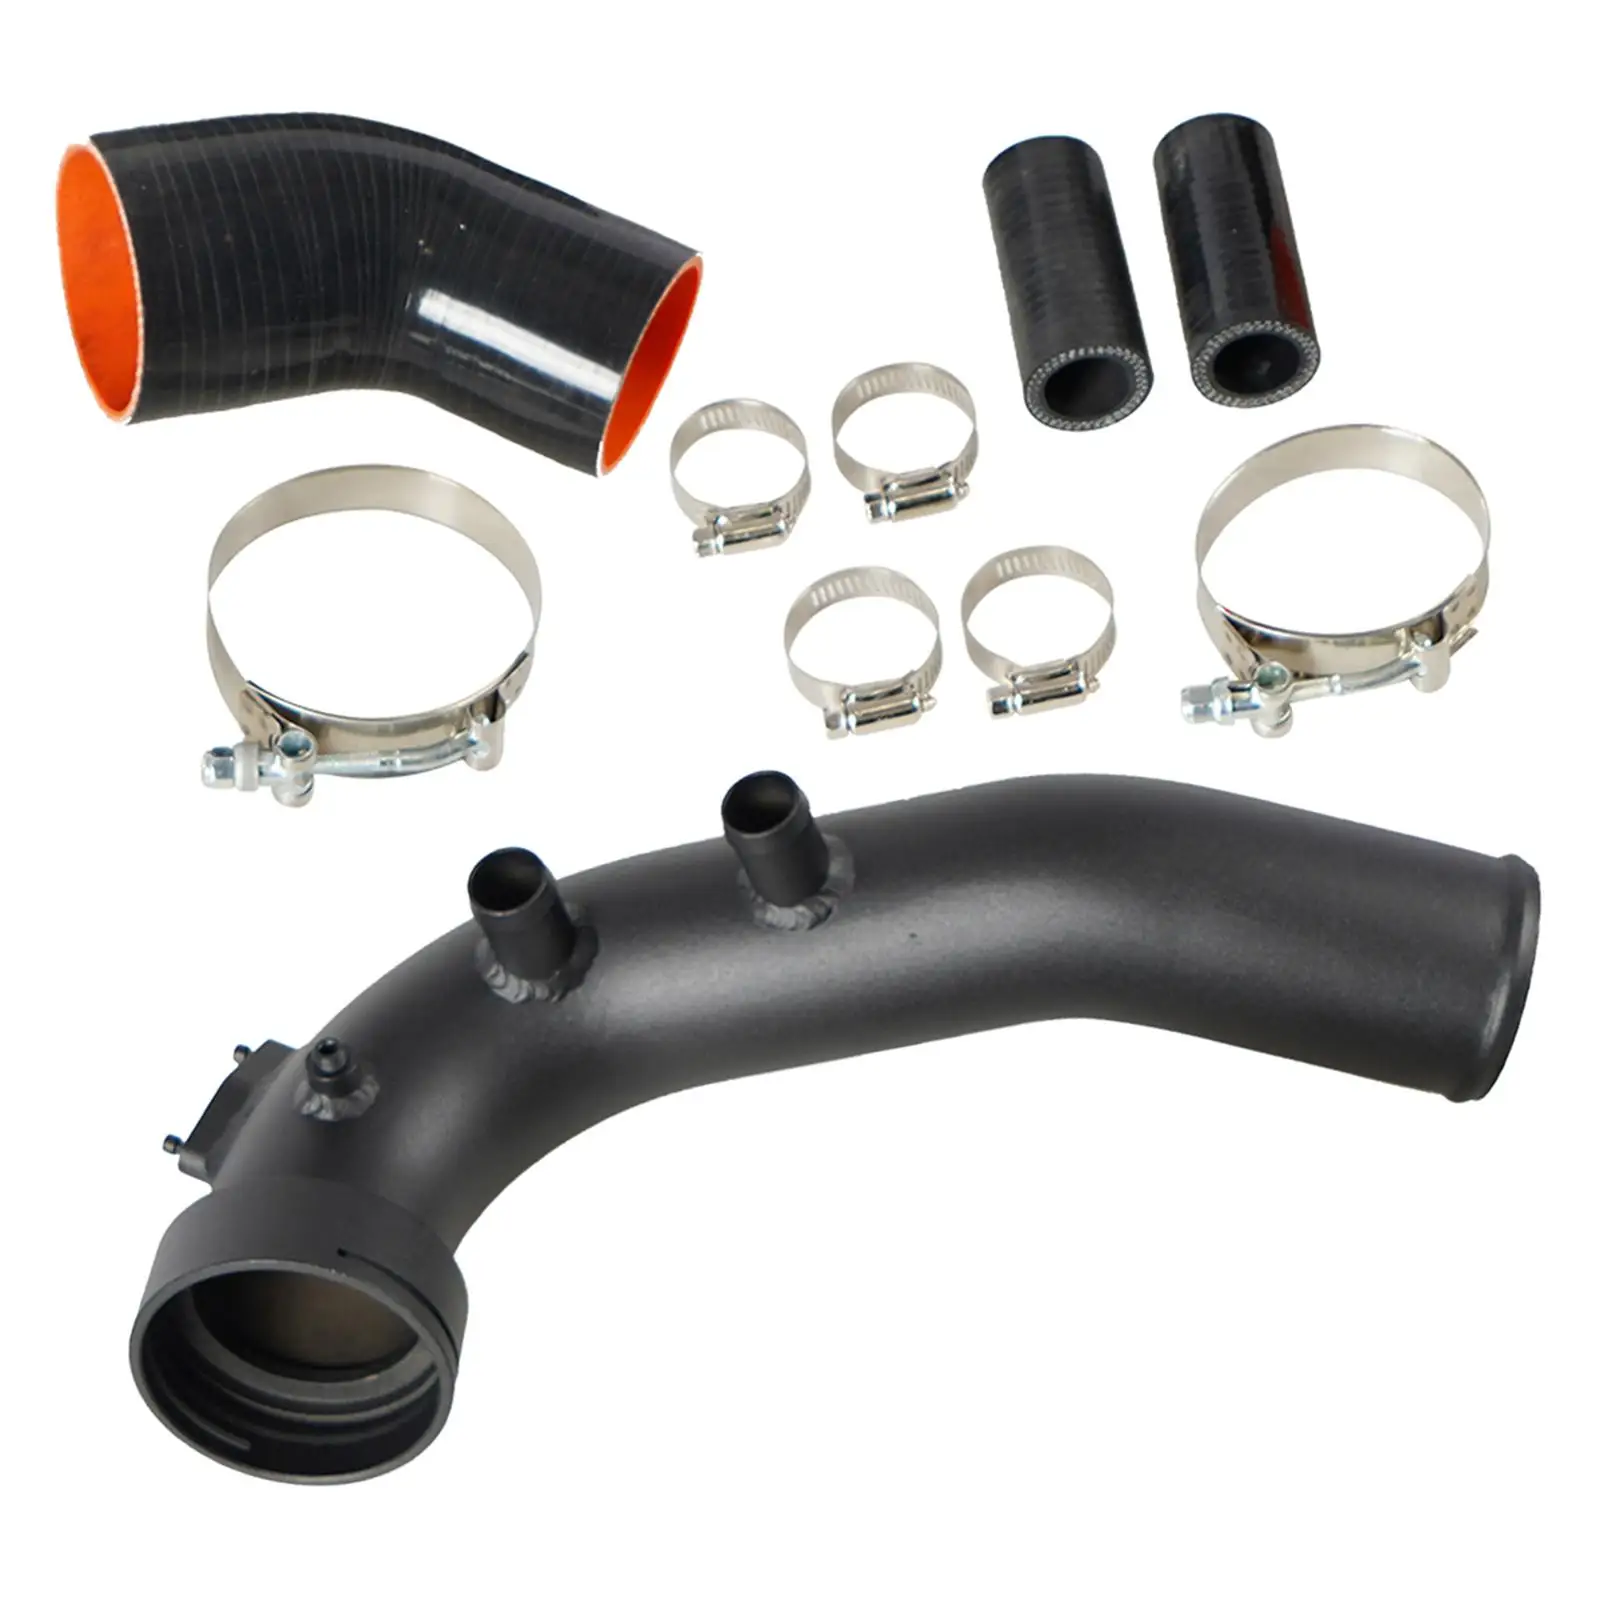 Air Intake Charge Pipe Kit Replacement Parts for BMW N54 E88 E90 E92 135i